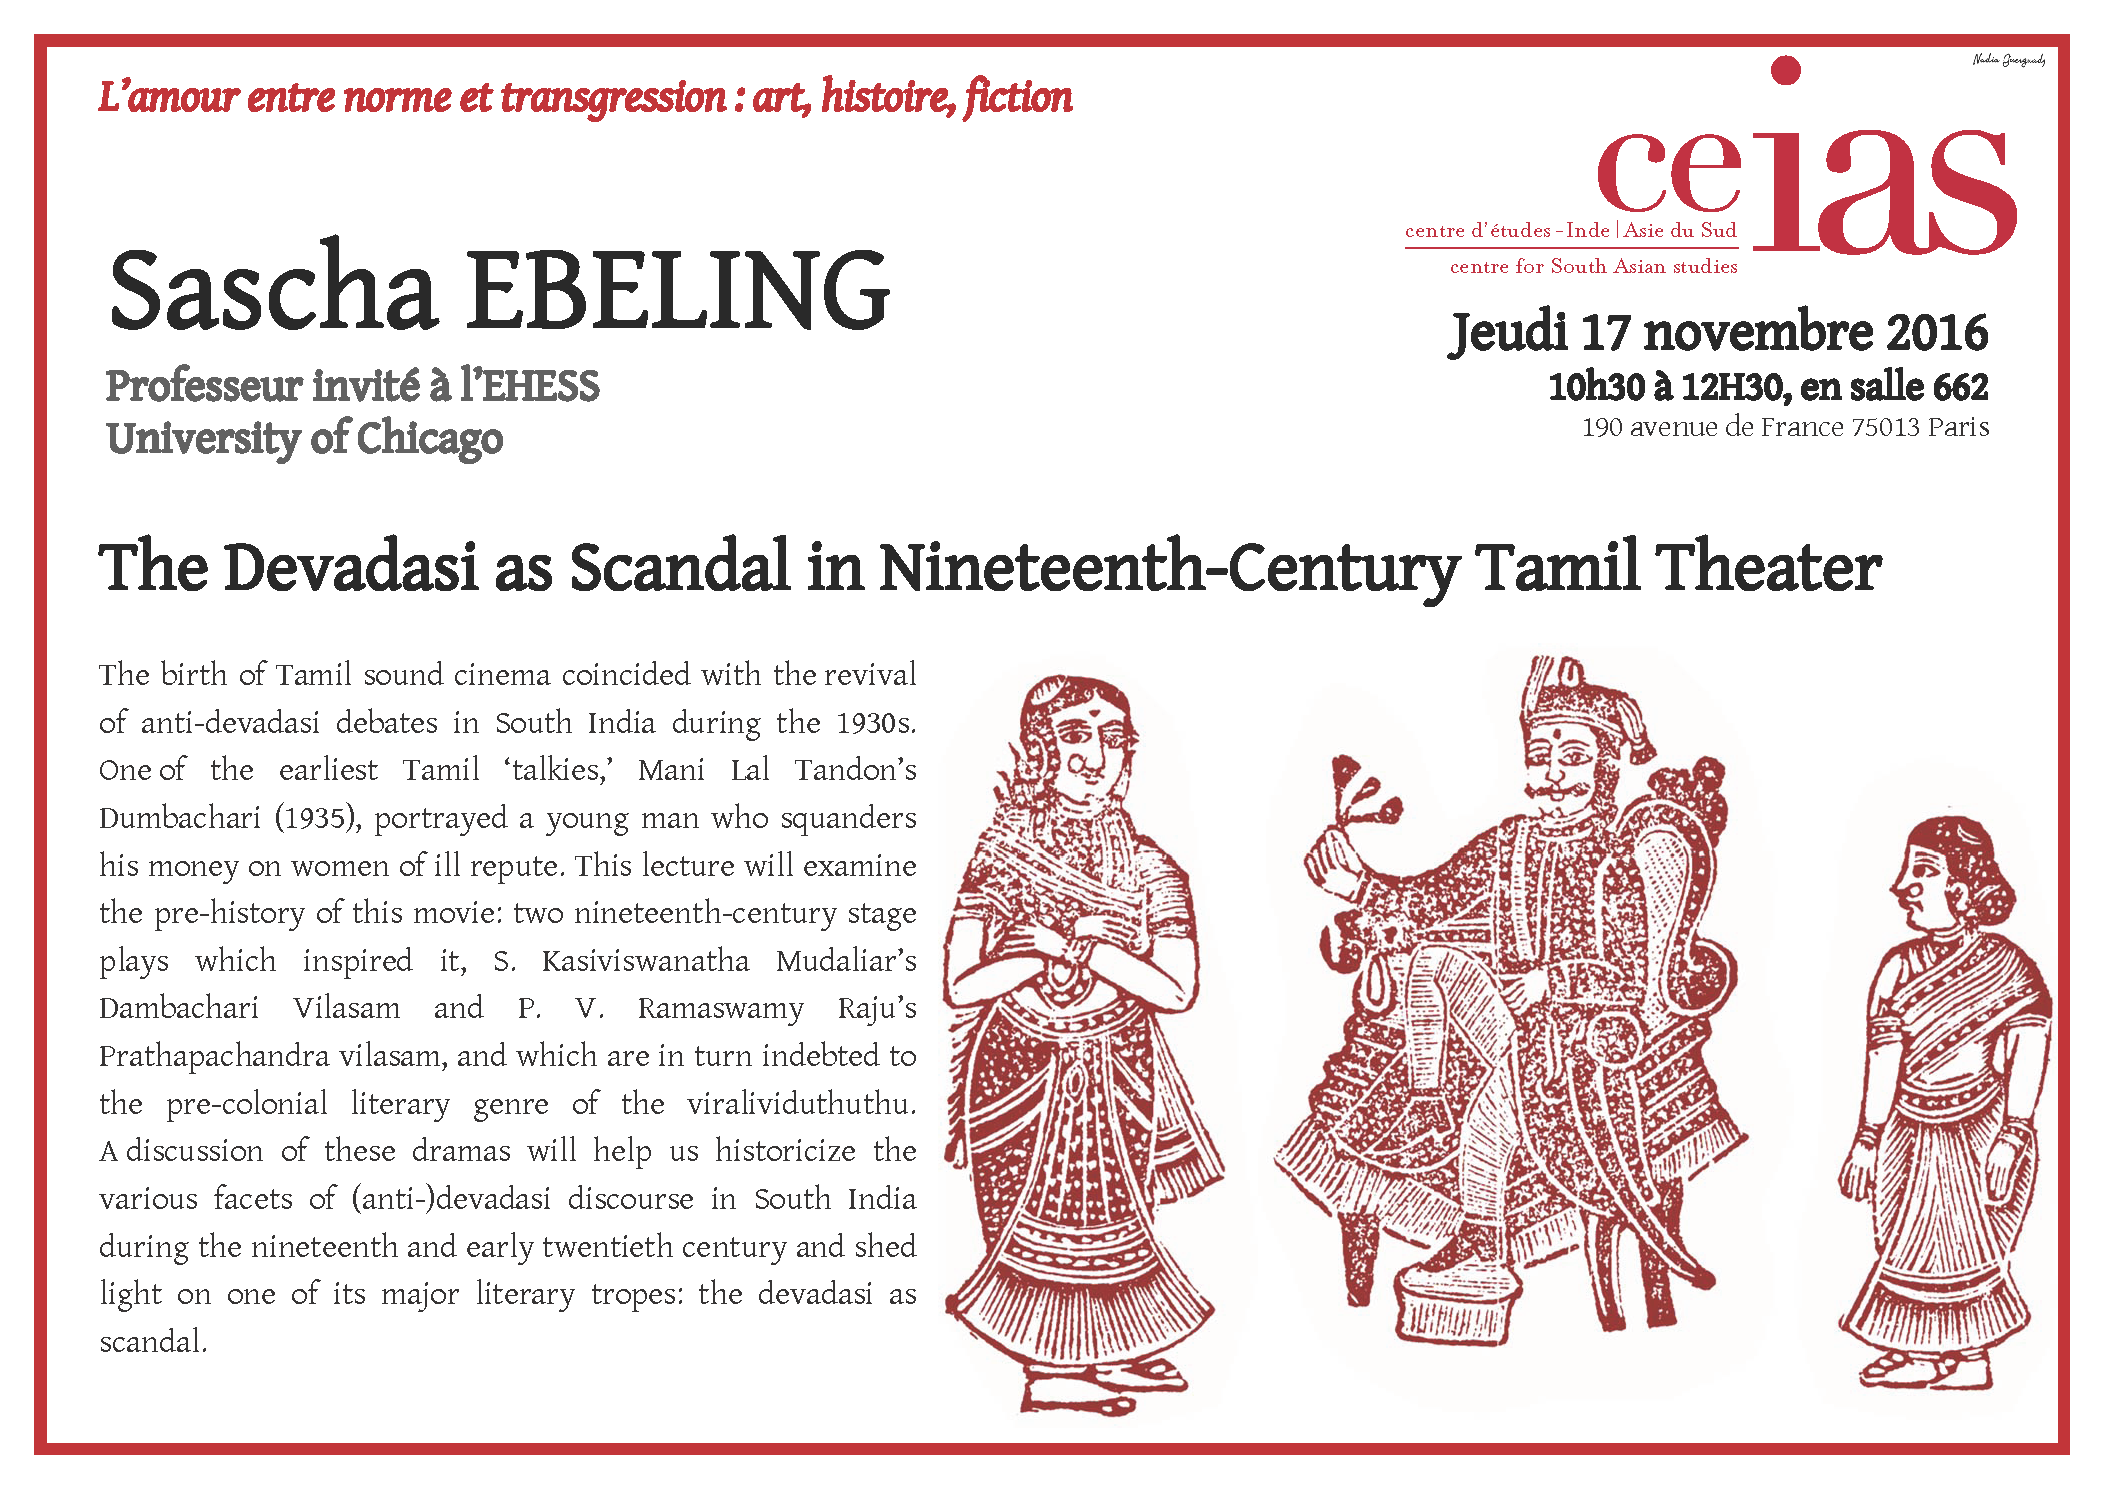 The Devadasi as Scandal in Nineteenth-Century Tamil Theater